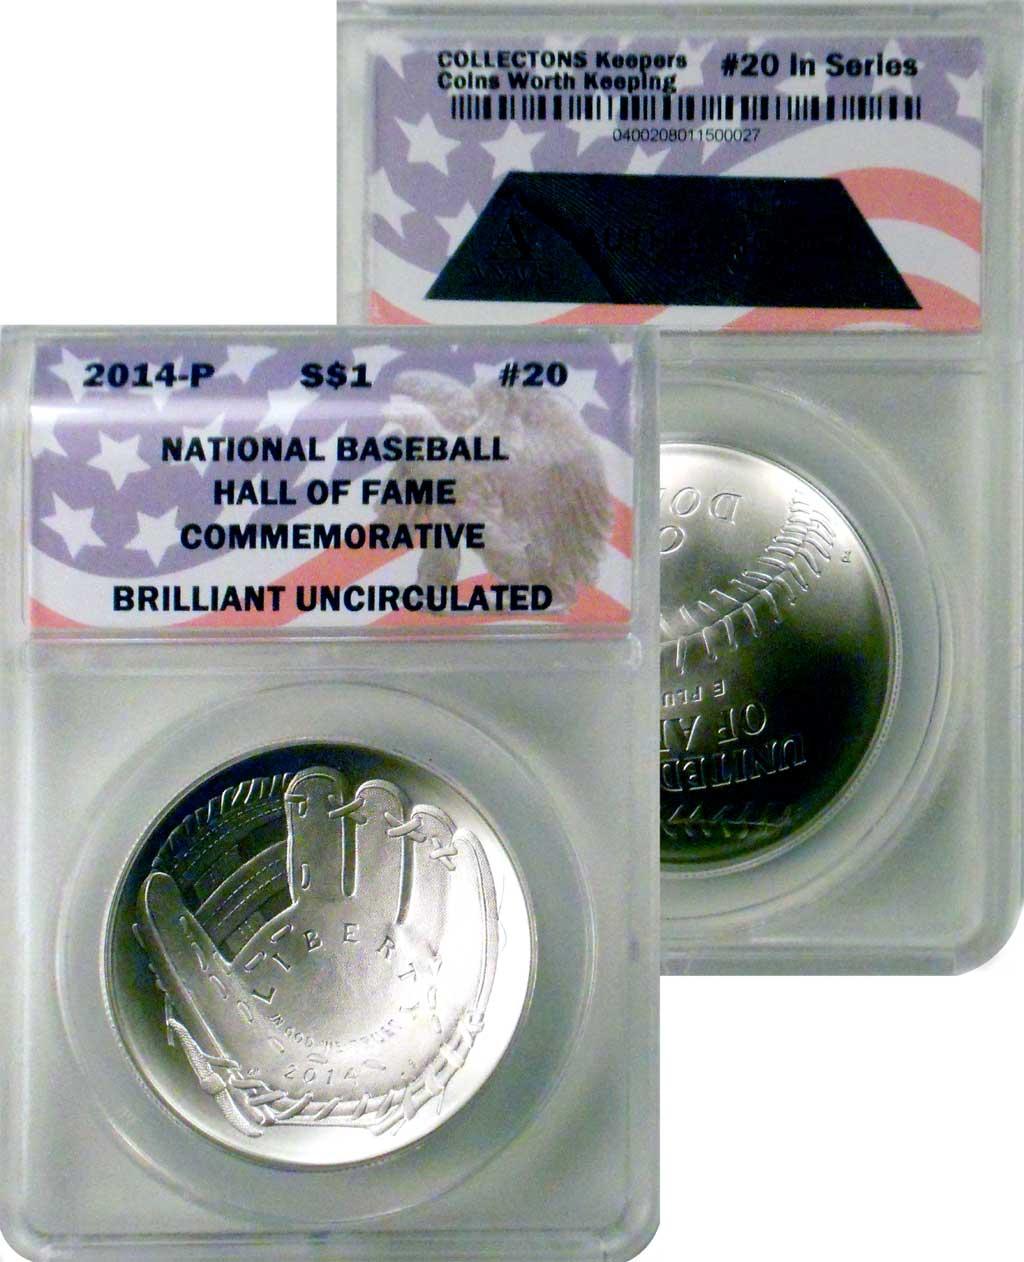 CollecTons Keepers #20: 2014-P National Baseball Hall of Fame Brilliant Uncirculated Commemorative Silver Dollar Certified in Exclusive ANACS Brilliant Uncirculated Holder